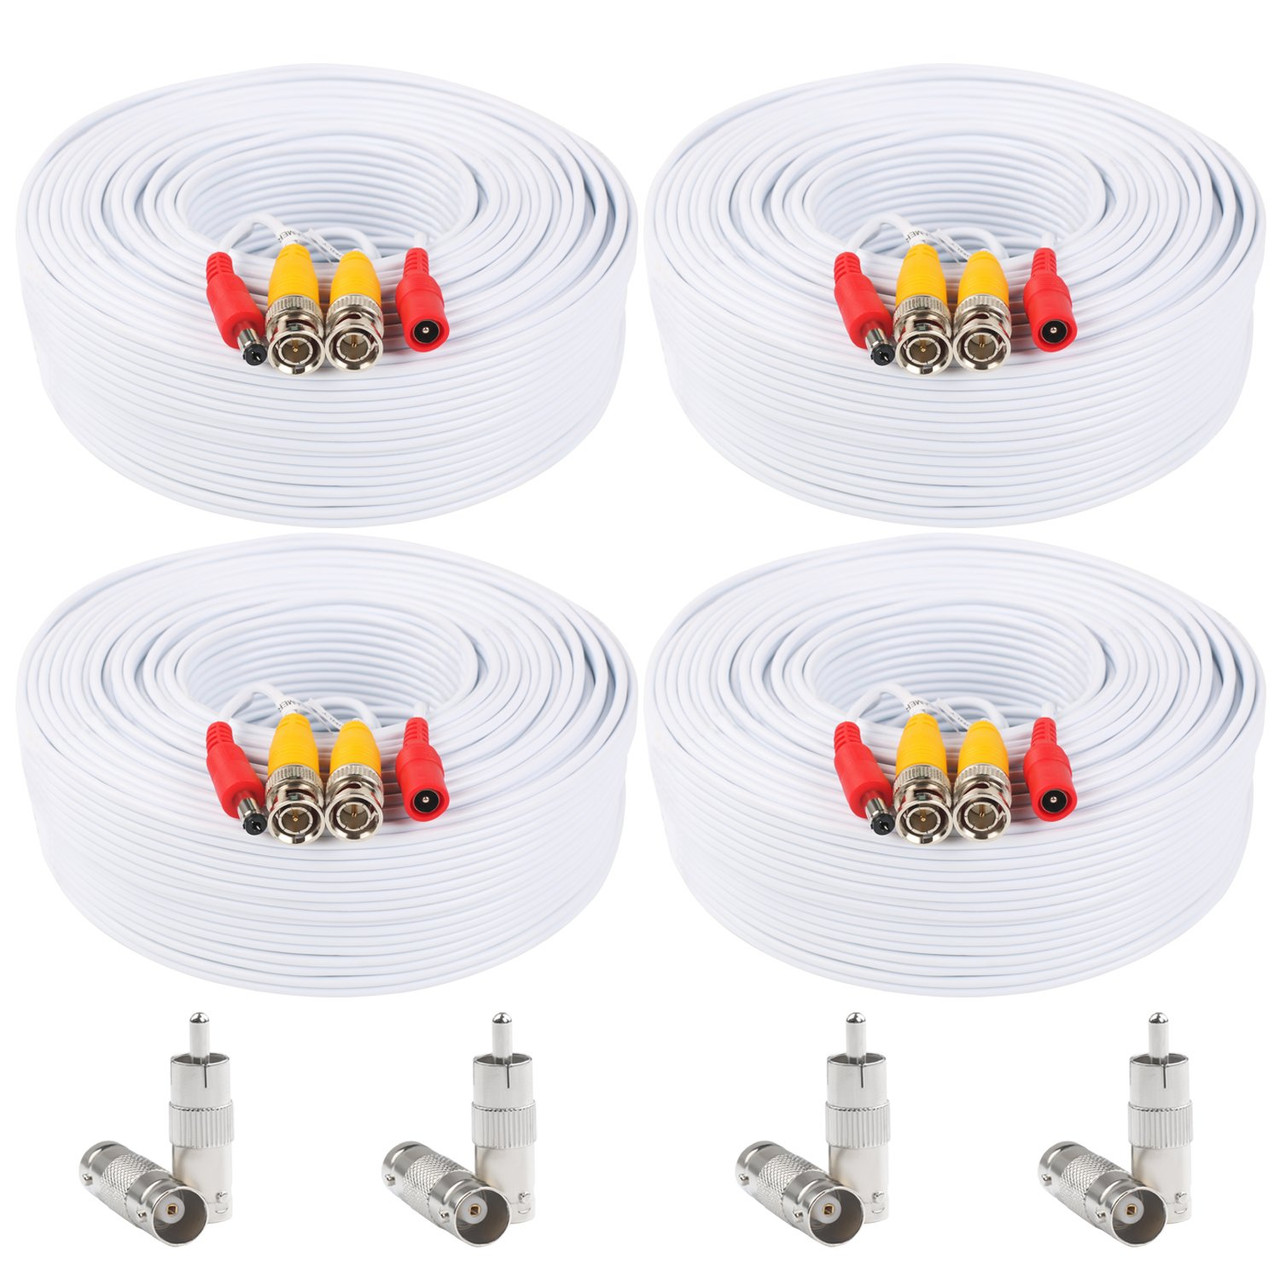 Postta 130Feet (39m ) All-in-One CCTV Video (BNC) + Power Cables , White - 4 Pack Kit - [From 122.00 - Choose pk Qty ] - *Ships from Miami